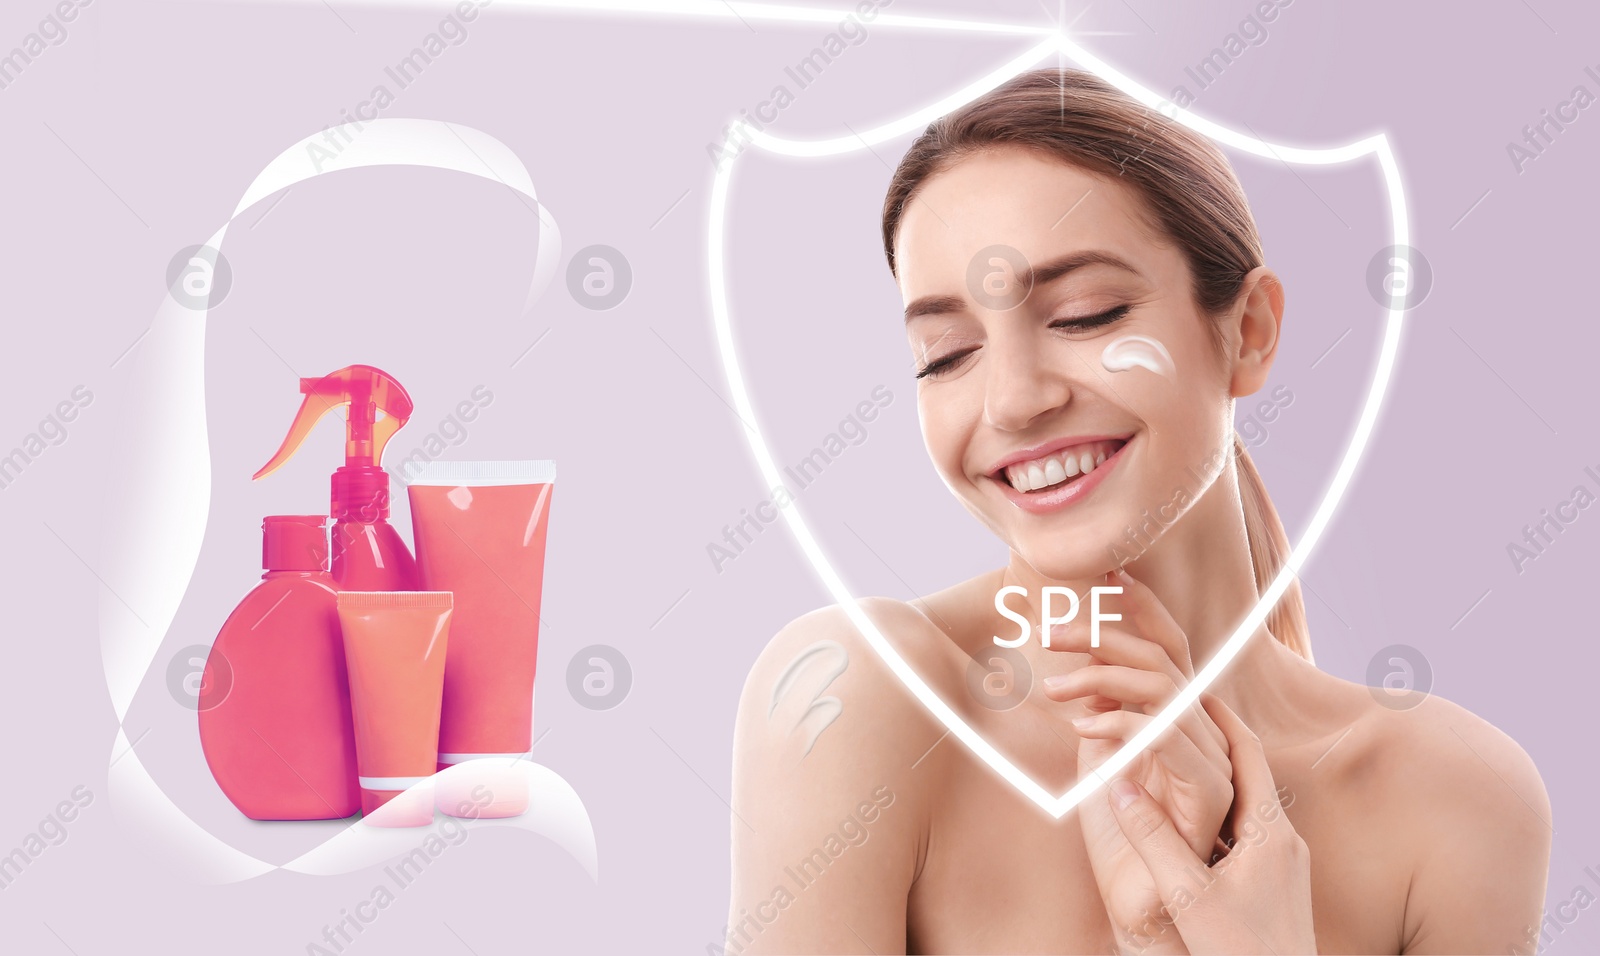 Image of SPF shield and beautiful young woman with healthy skin on pink background. Sun protection cosmetic product